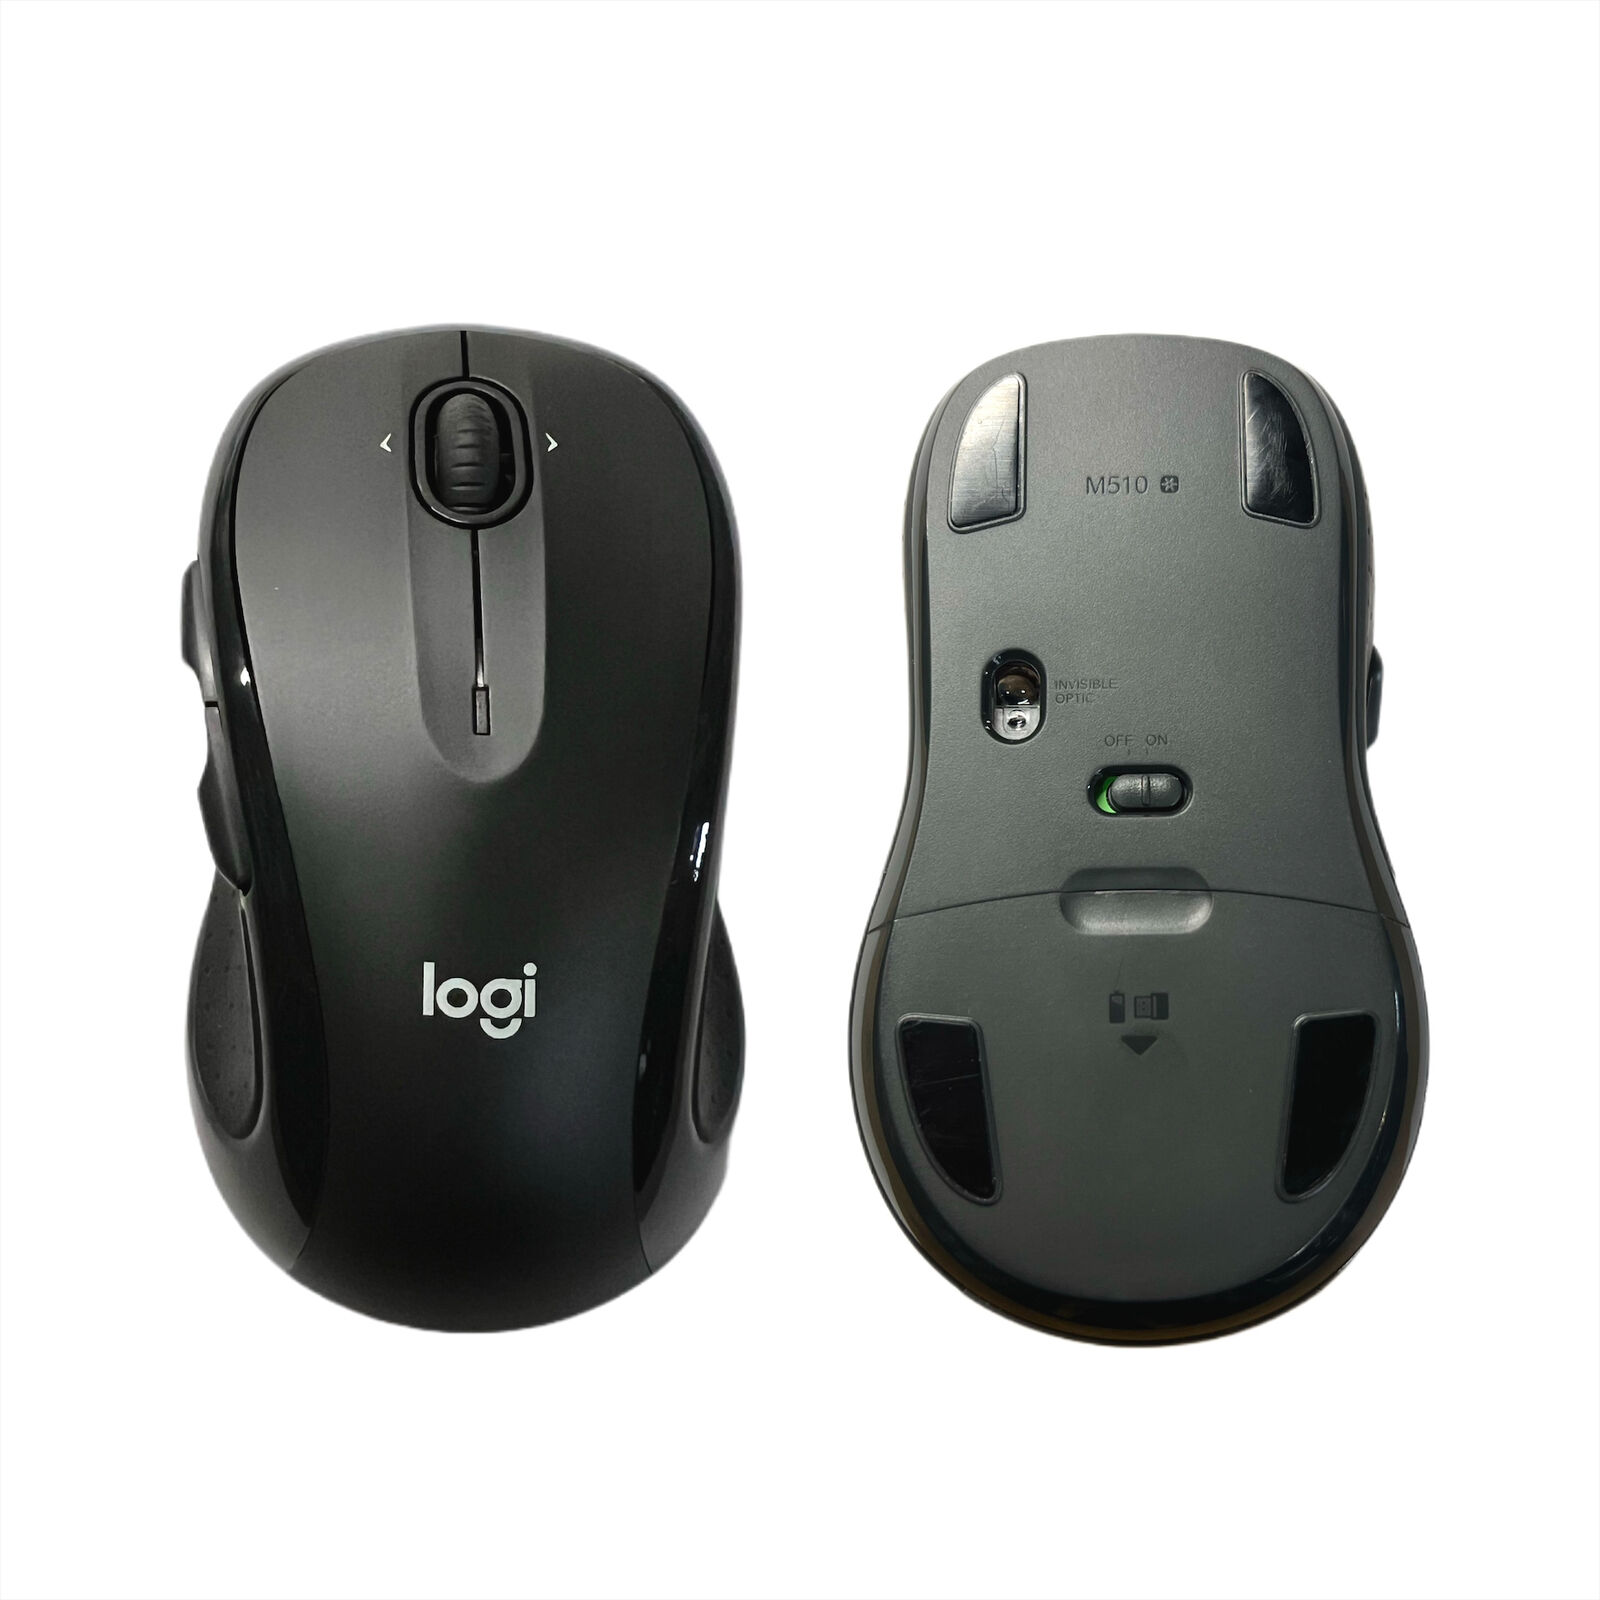 Logitech M510 Wireless Computer Mouse with USB Unifying Receiver, Graphite